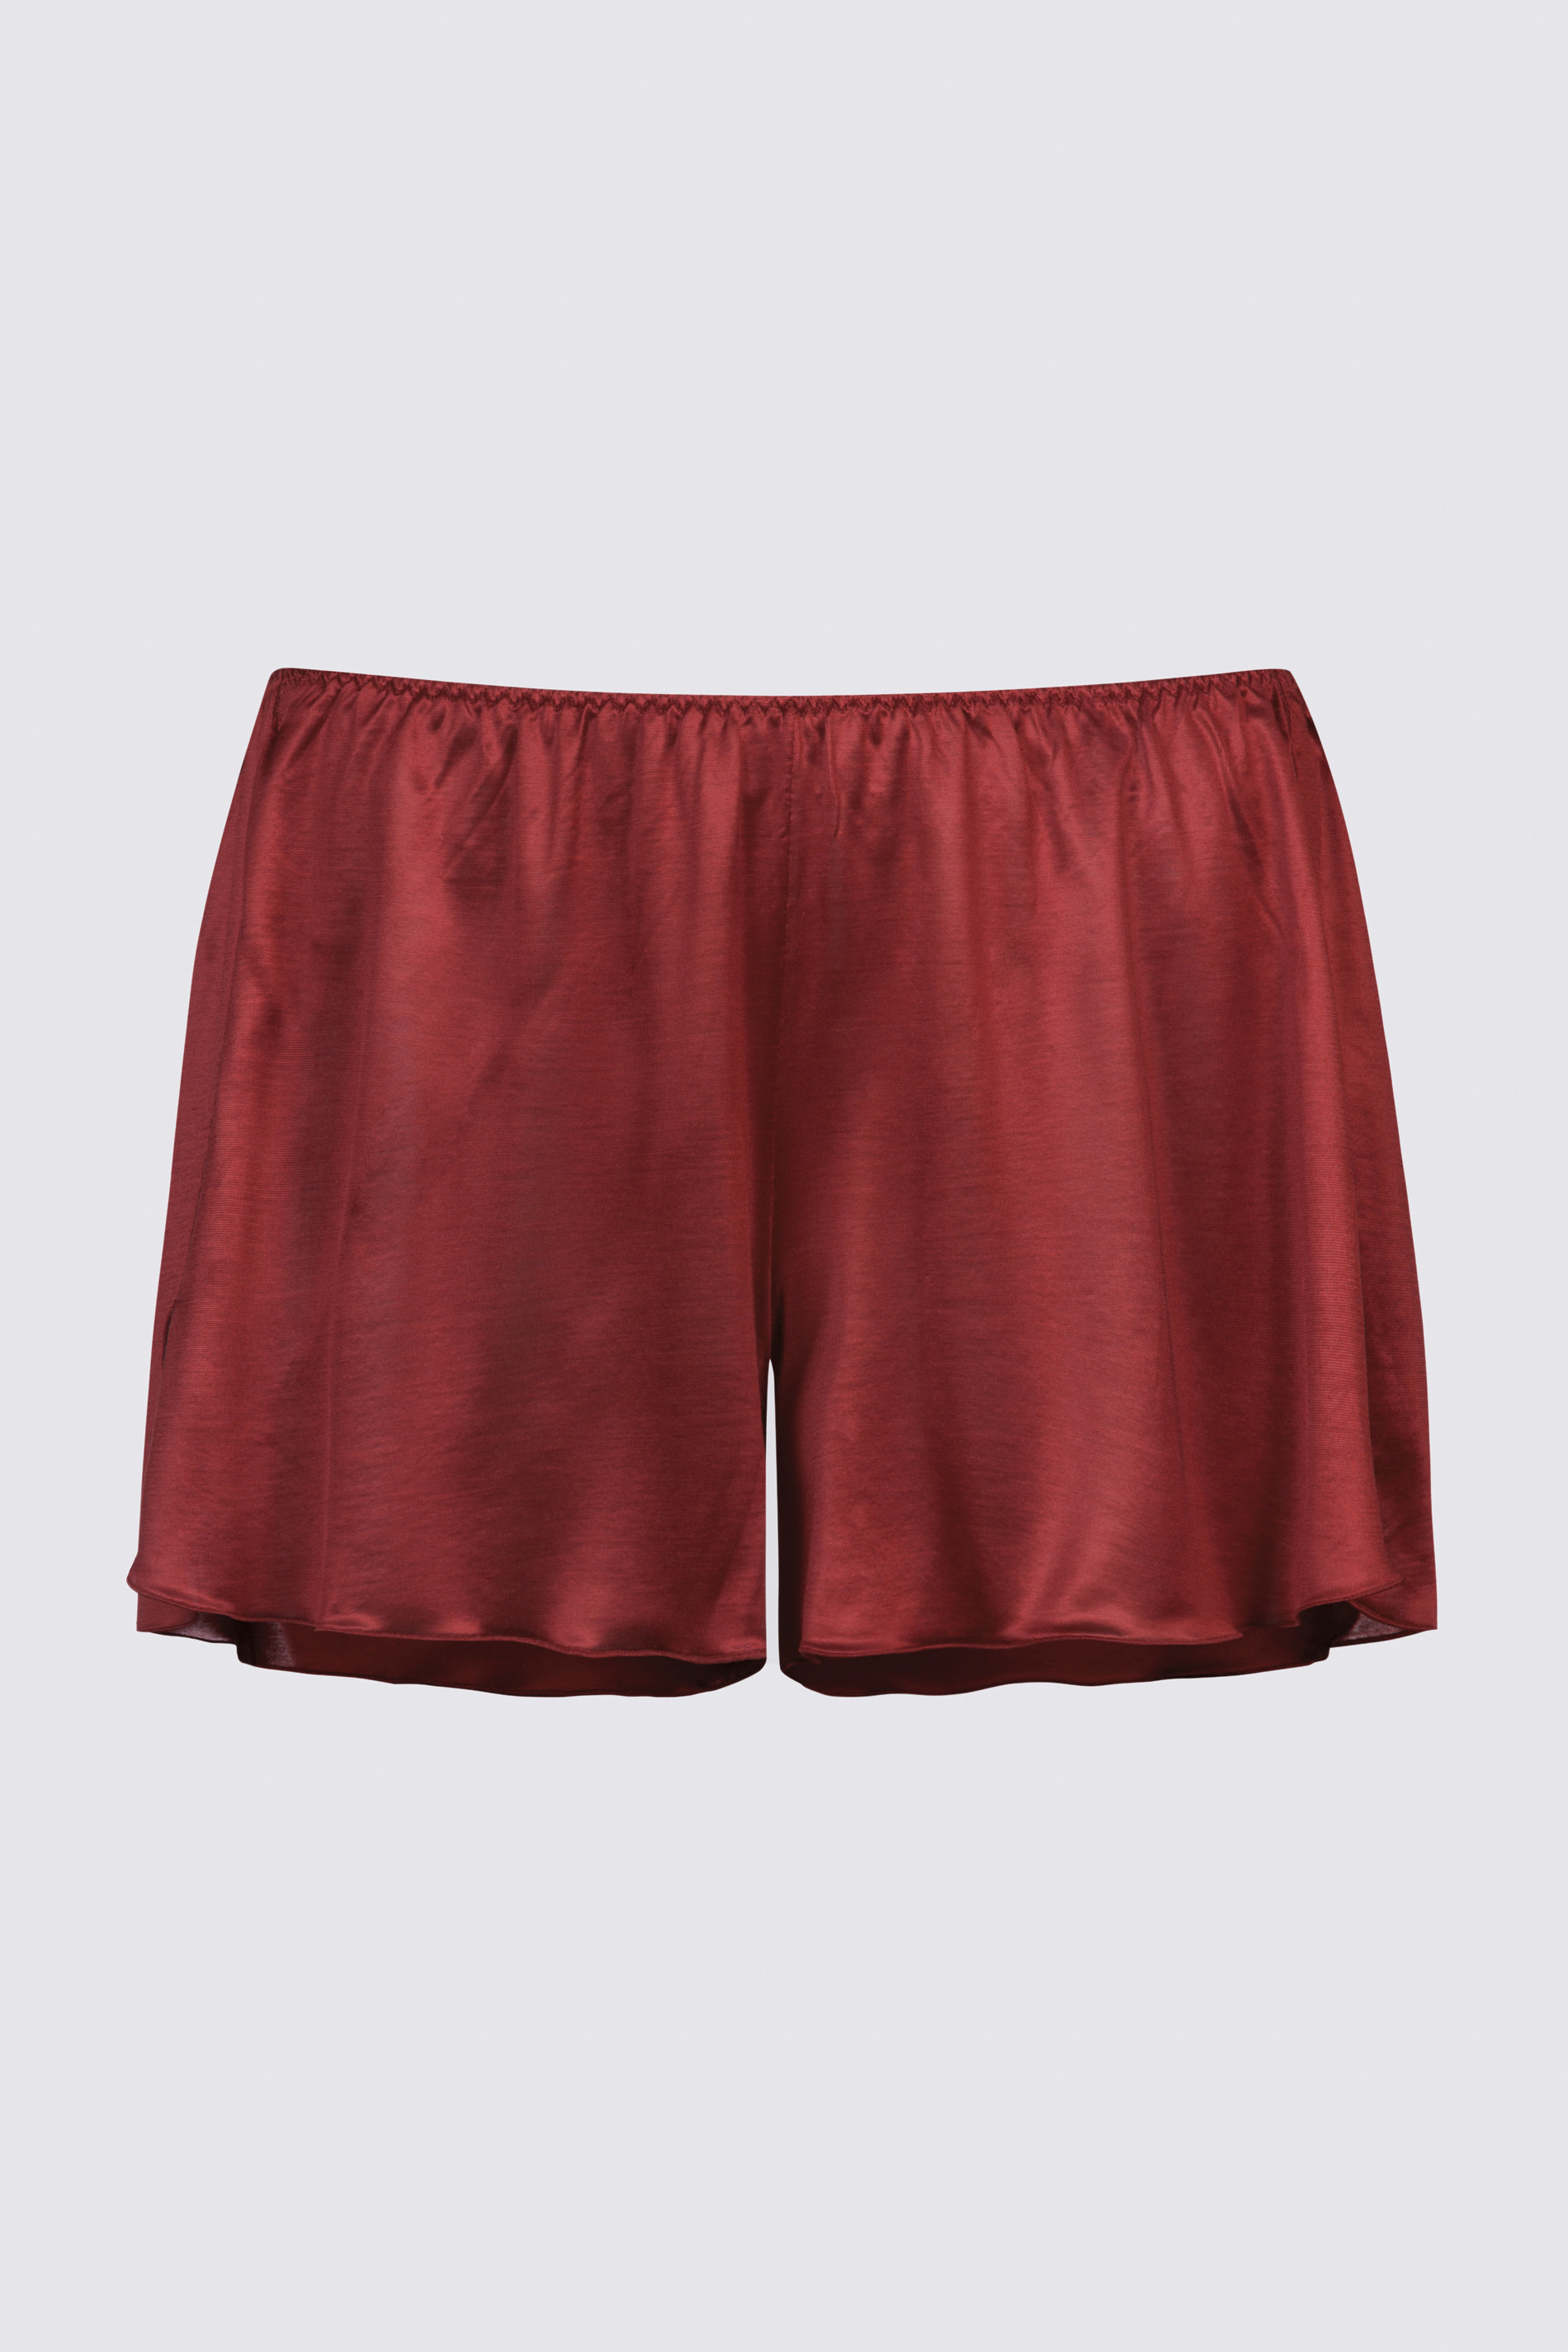 French knickers Red Pepper Serie Coco Uitknippen | mey®